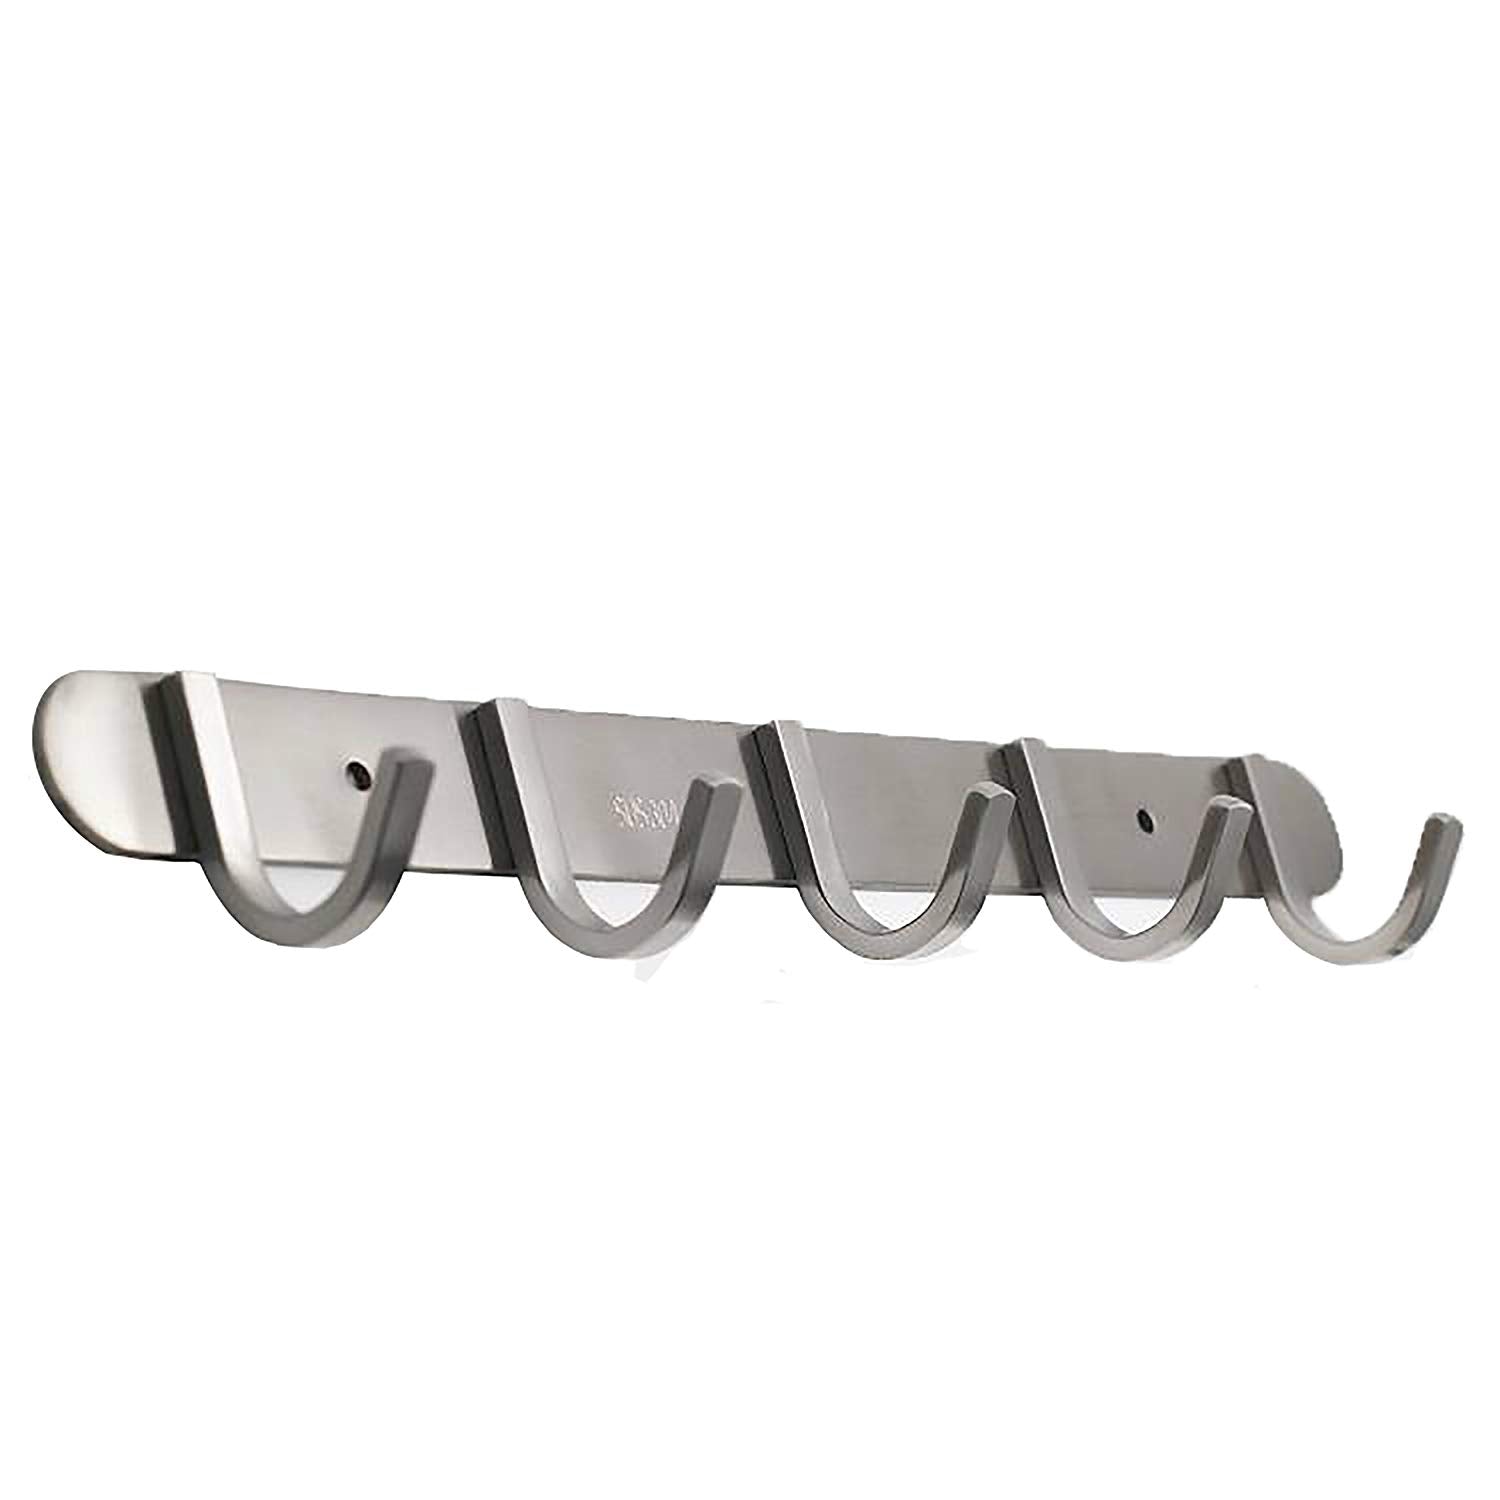 Coat Hook Rack with 5 Square Hooks - Premium Modern Wall Mounted - Ultra Durable with Solid Steel Construction, Brushed Stainless Steel Finish, Super